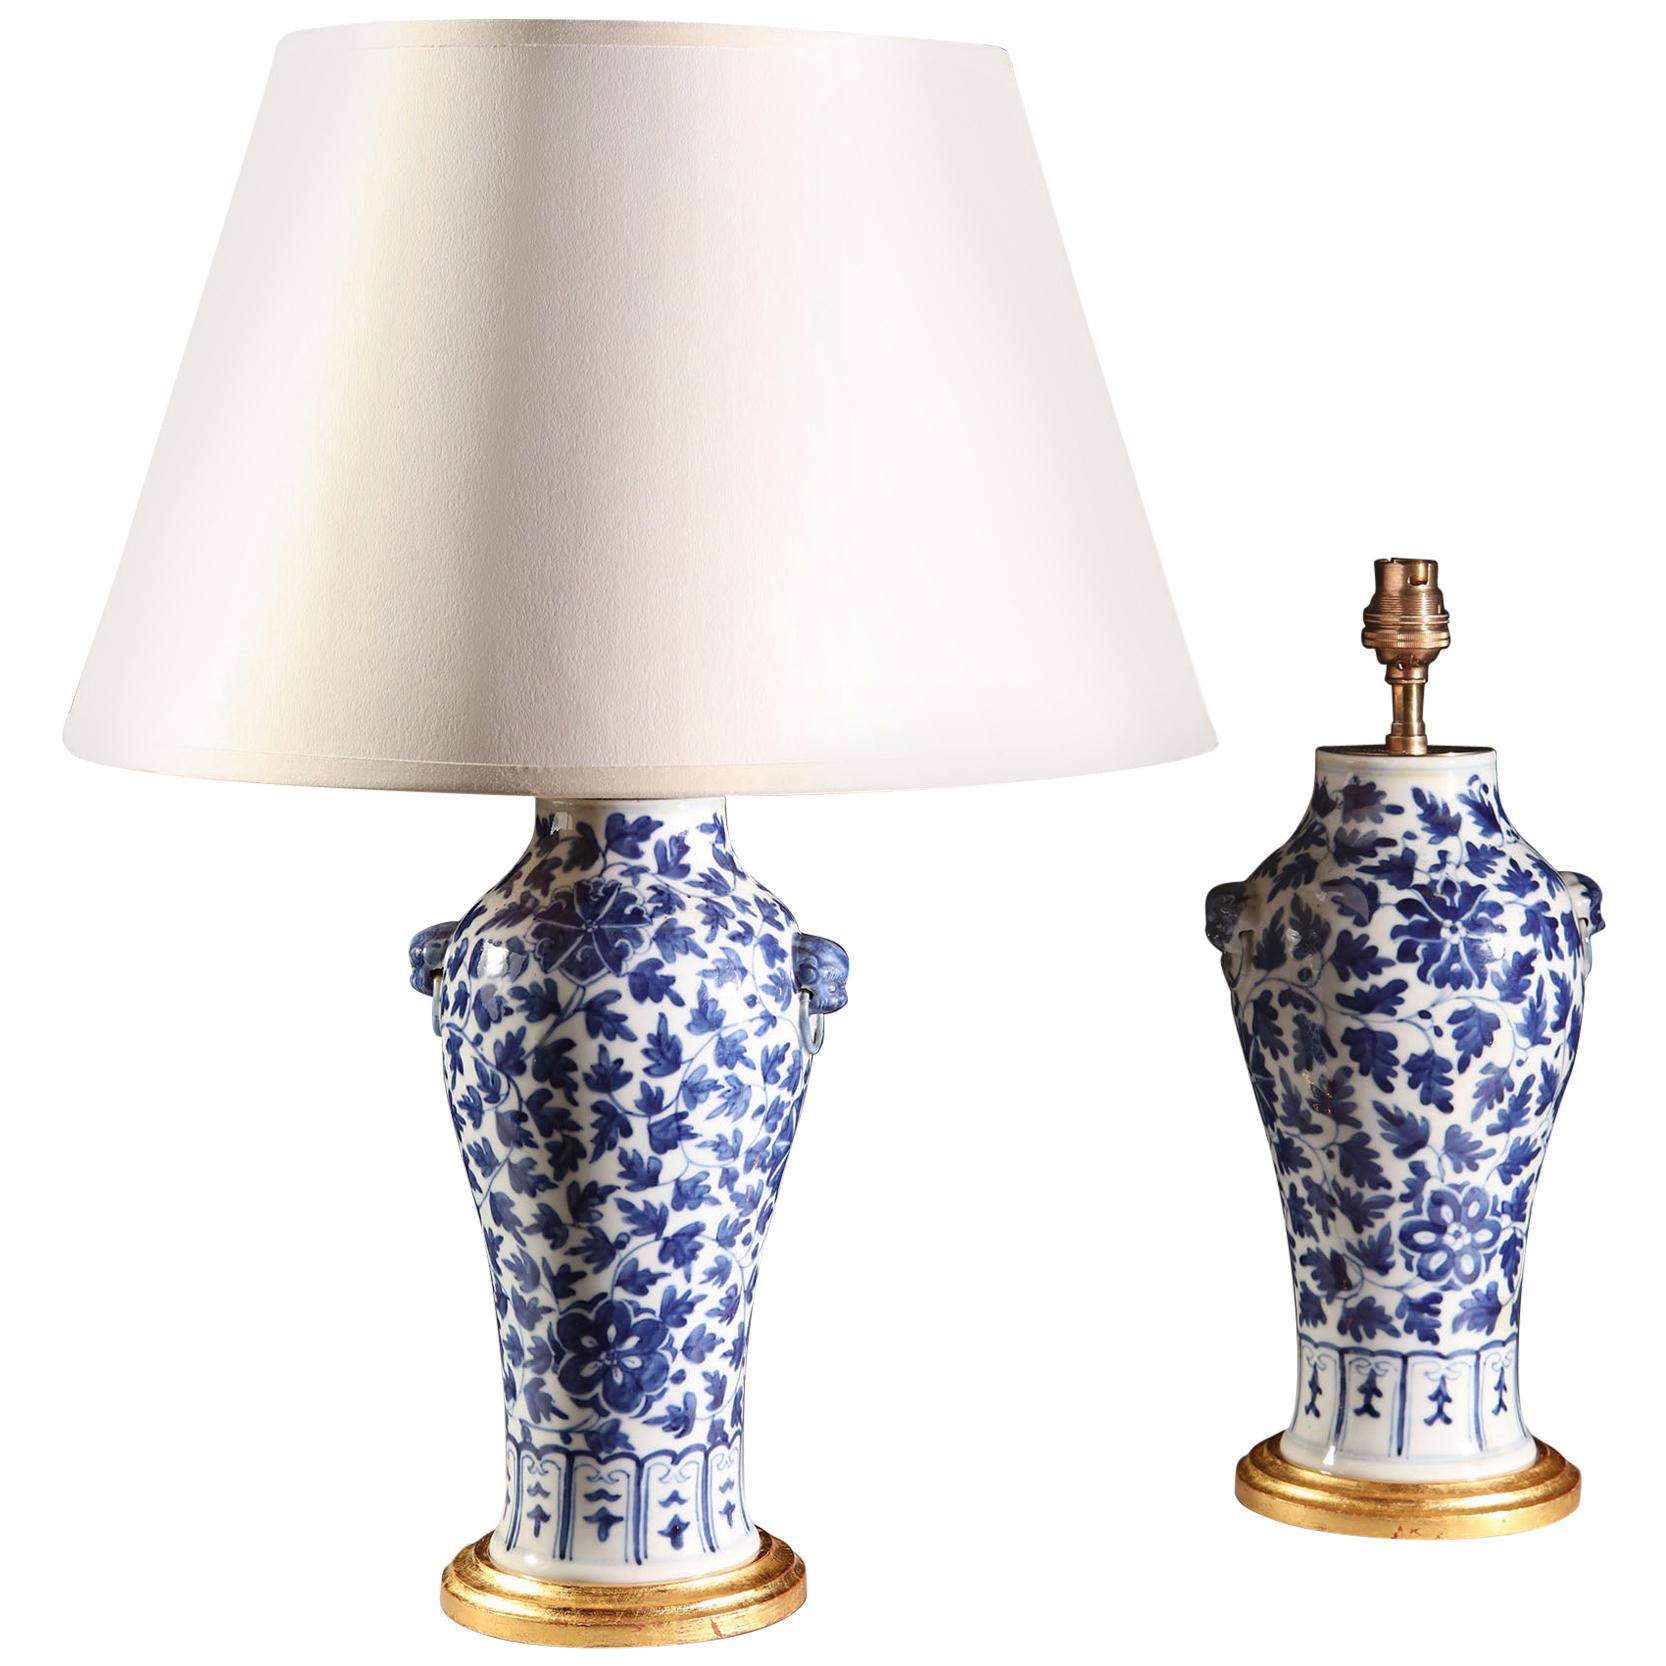 Pair of Late 19th Century Blue and White Chinese Vases as Table Lamps